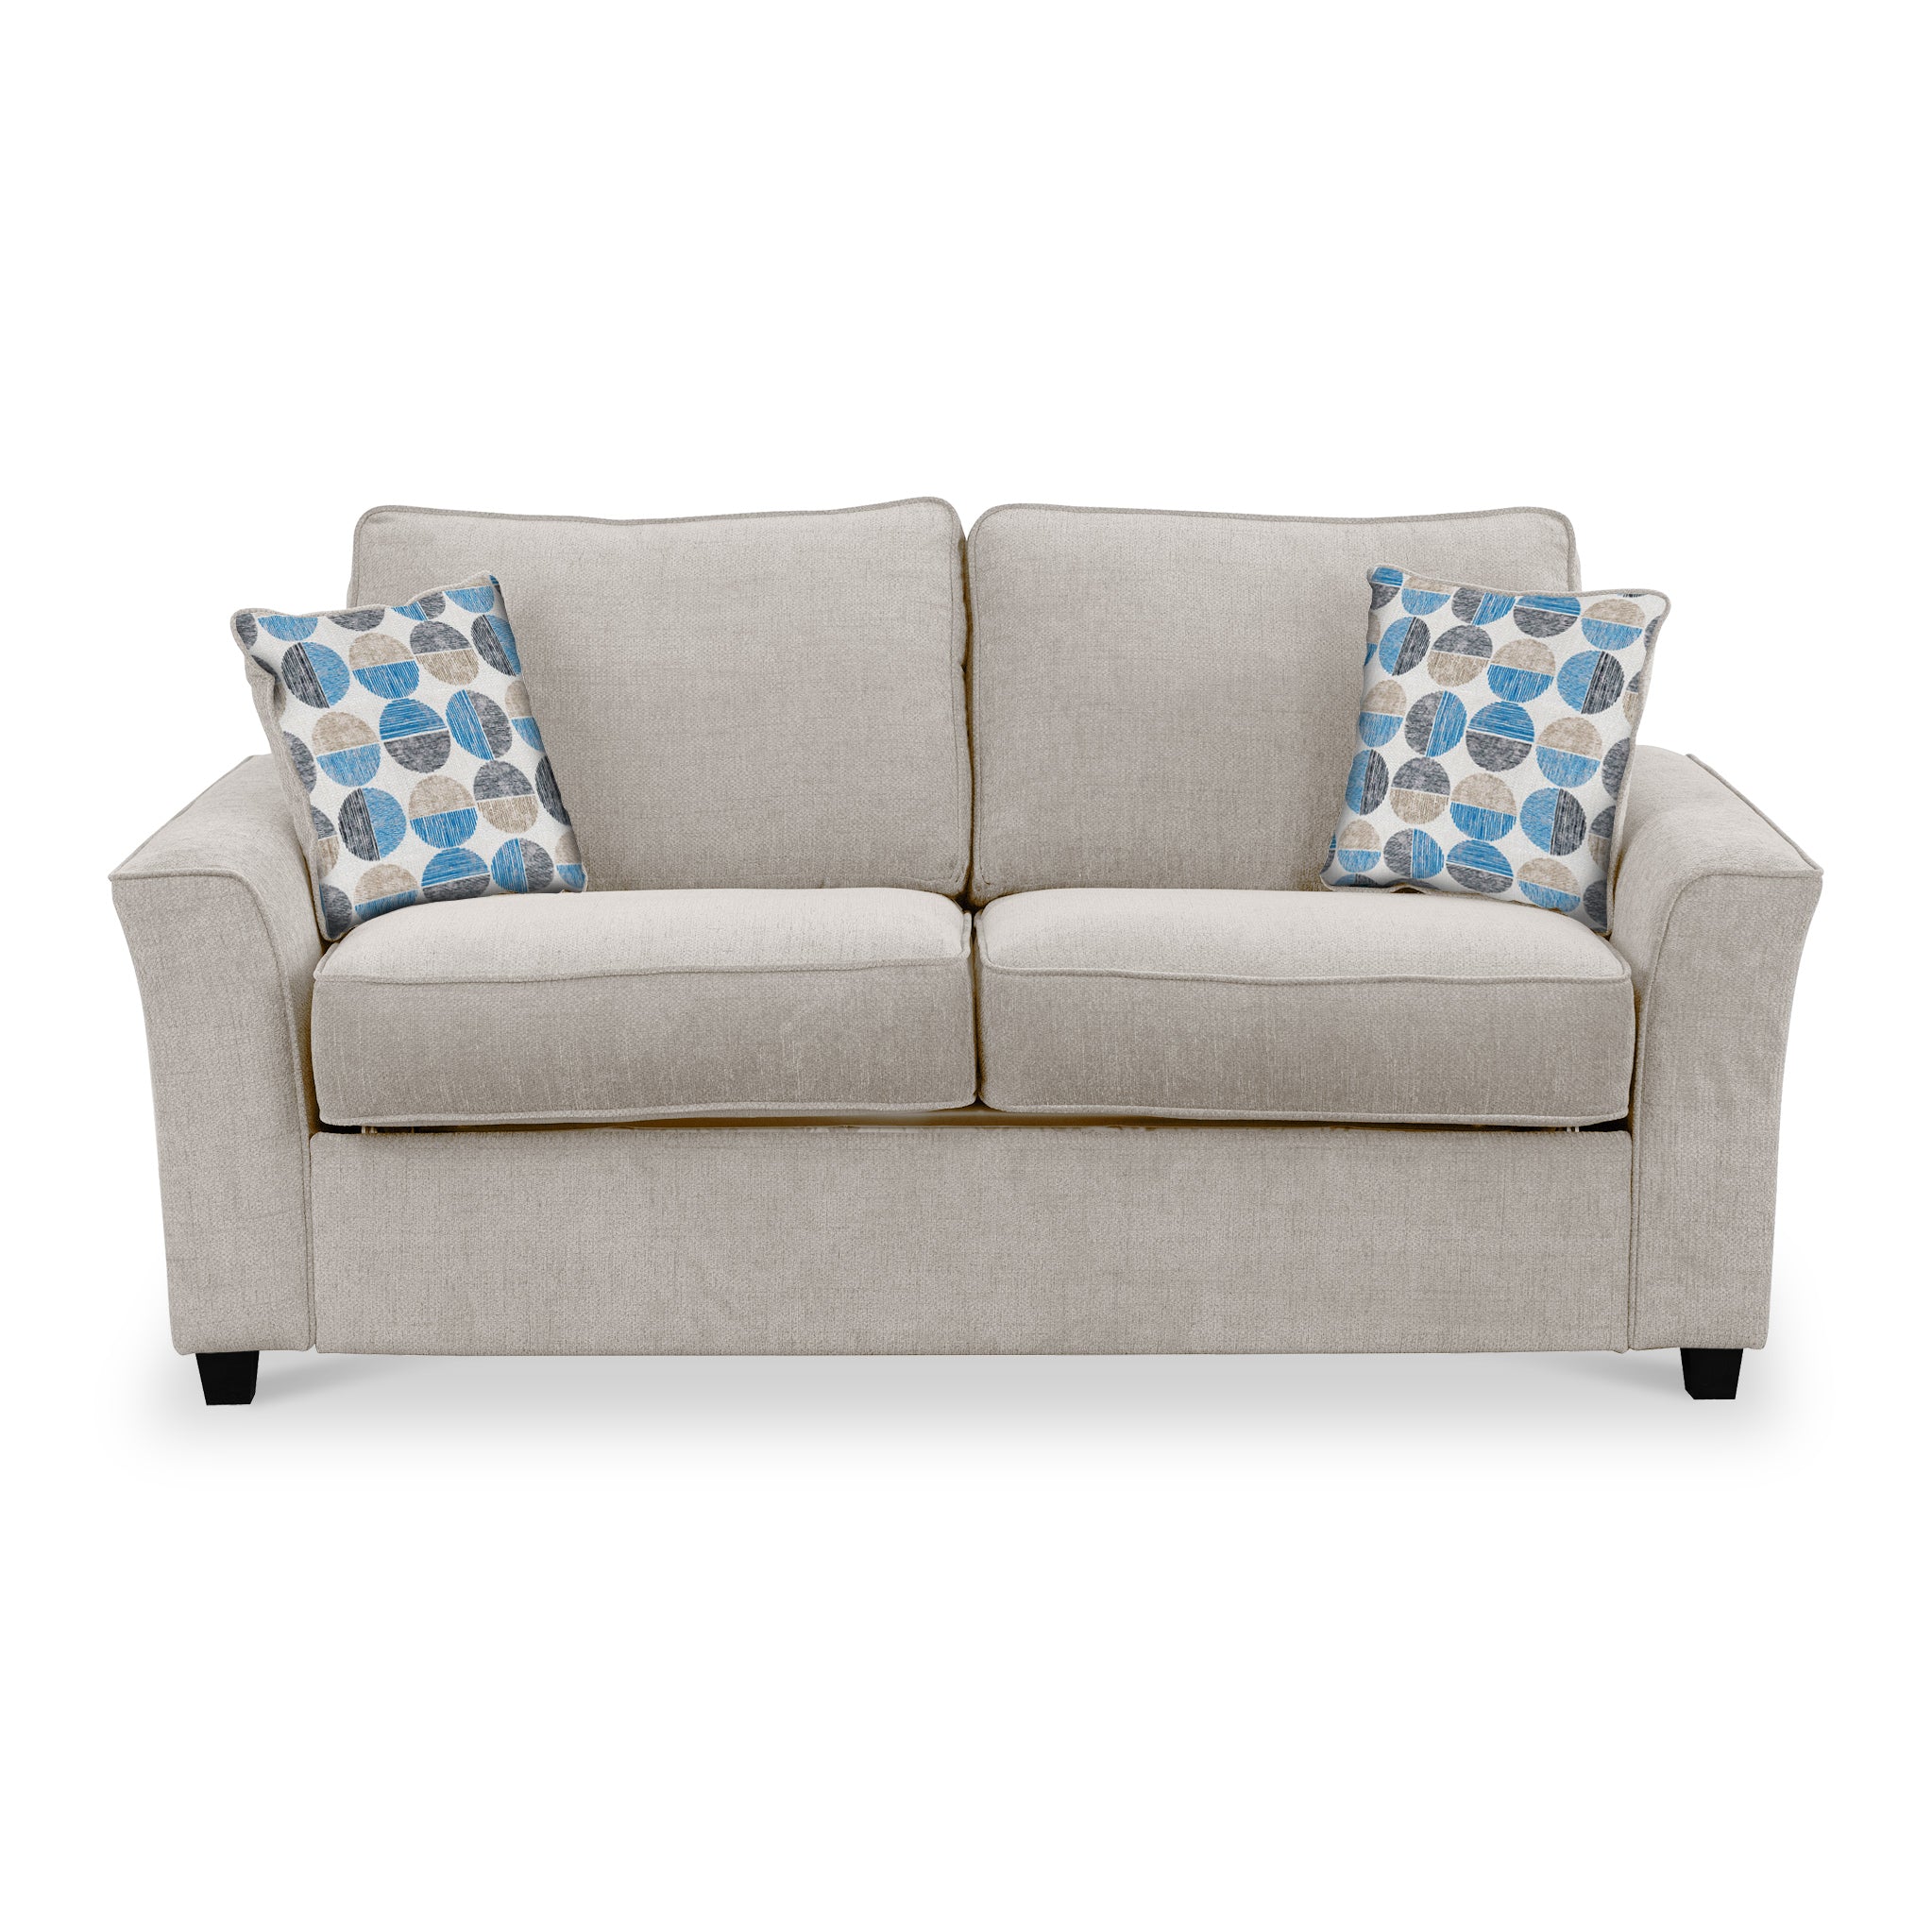 Boston Soft Weave Fabric 2 Seater Double Sofa Bed Grey Blue More